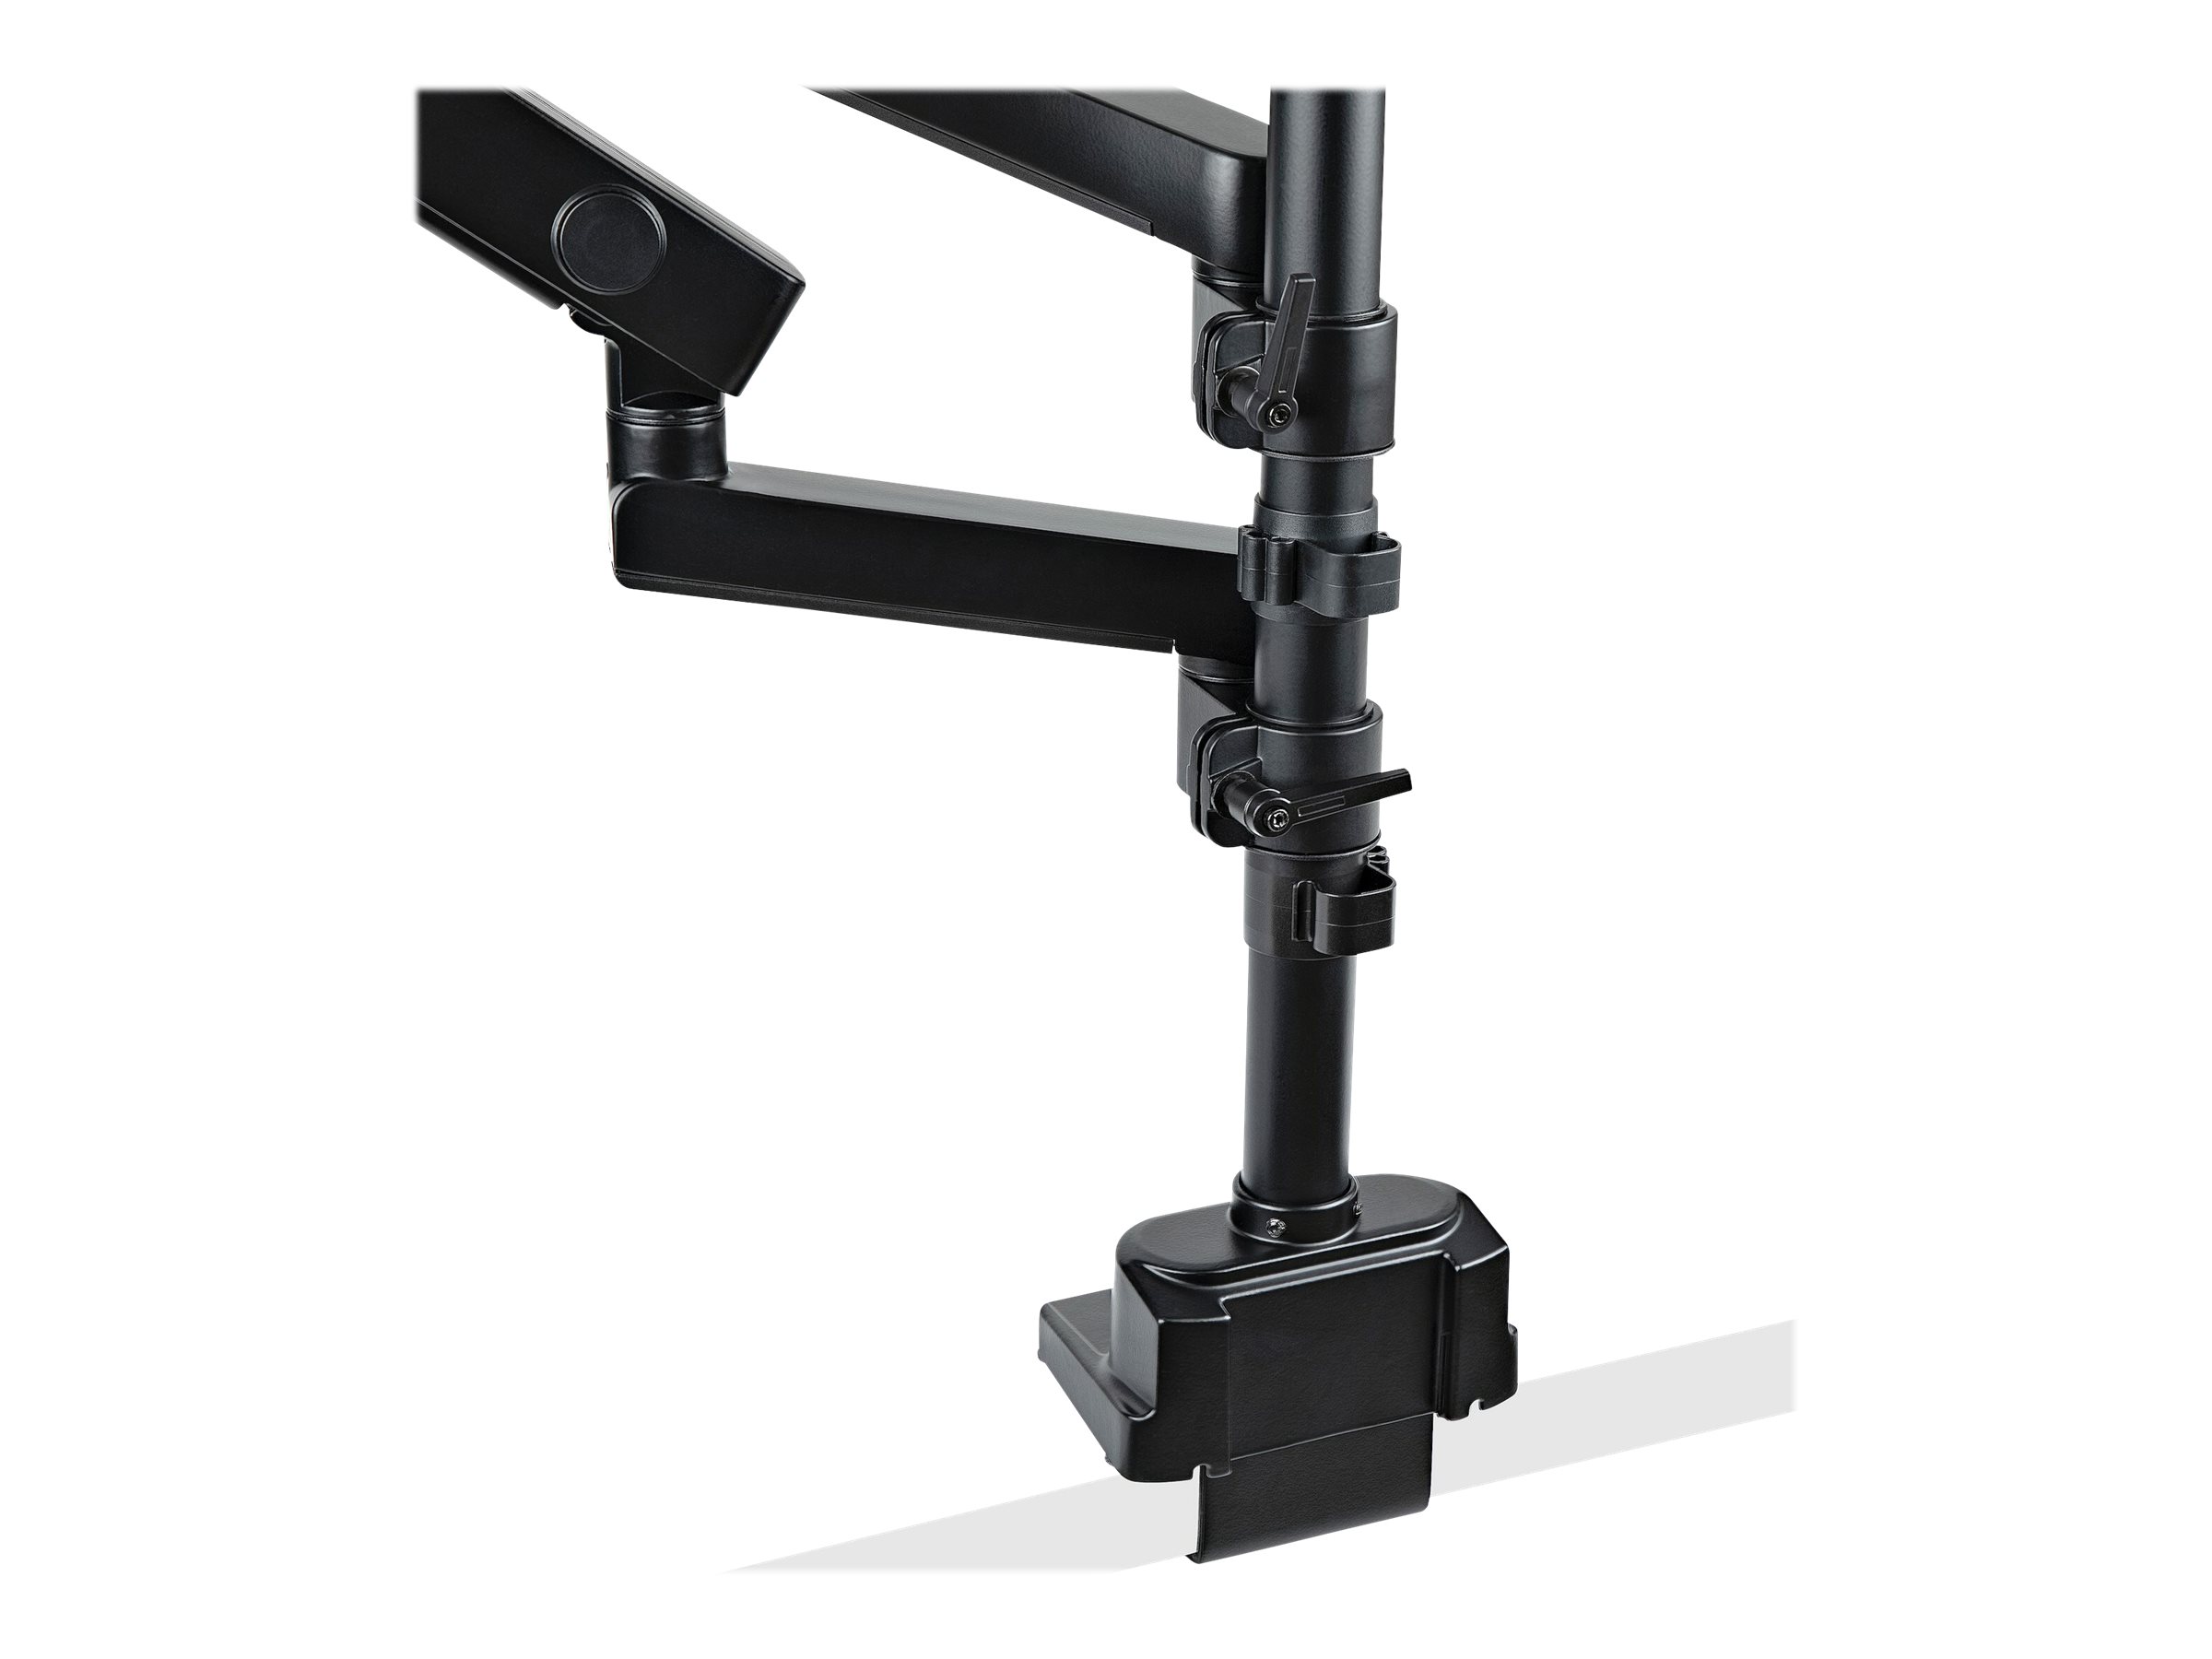 StarTech.com Desk Mount Dual Monitor Arm - Articulating - Up to 30